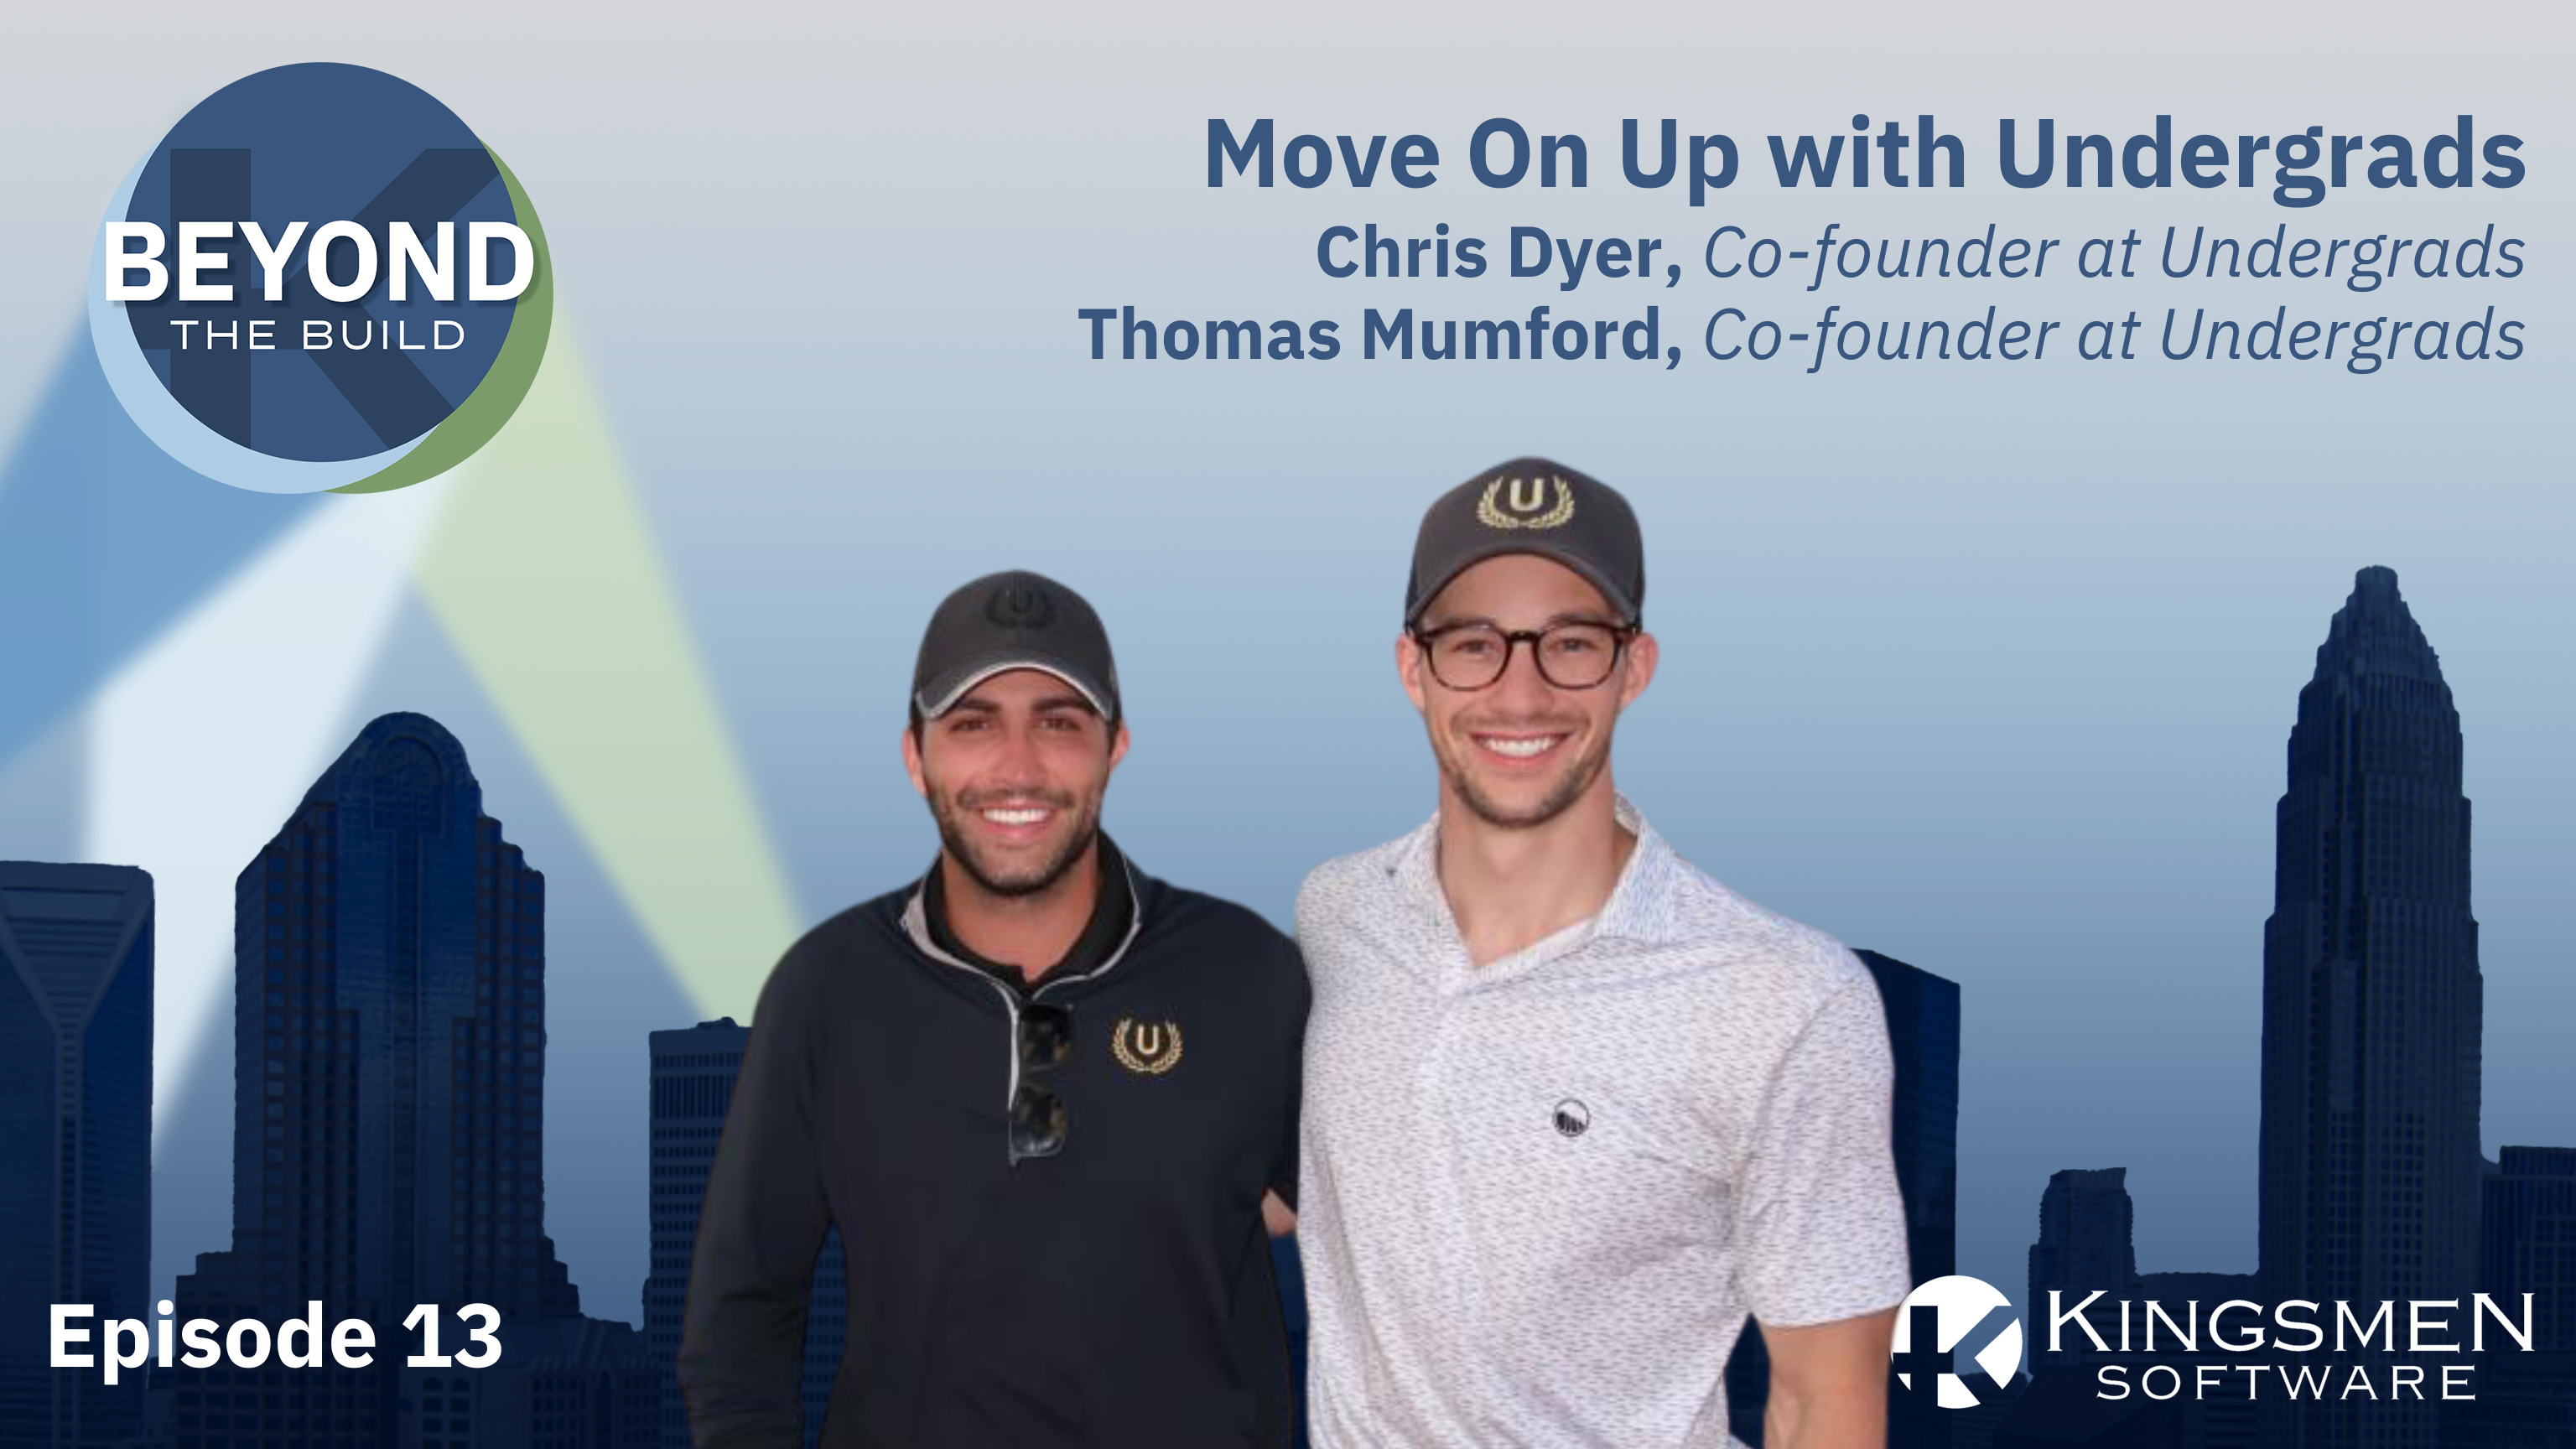 Episode 13: Move on Up with Undergrads